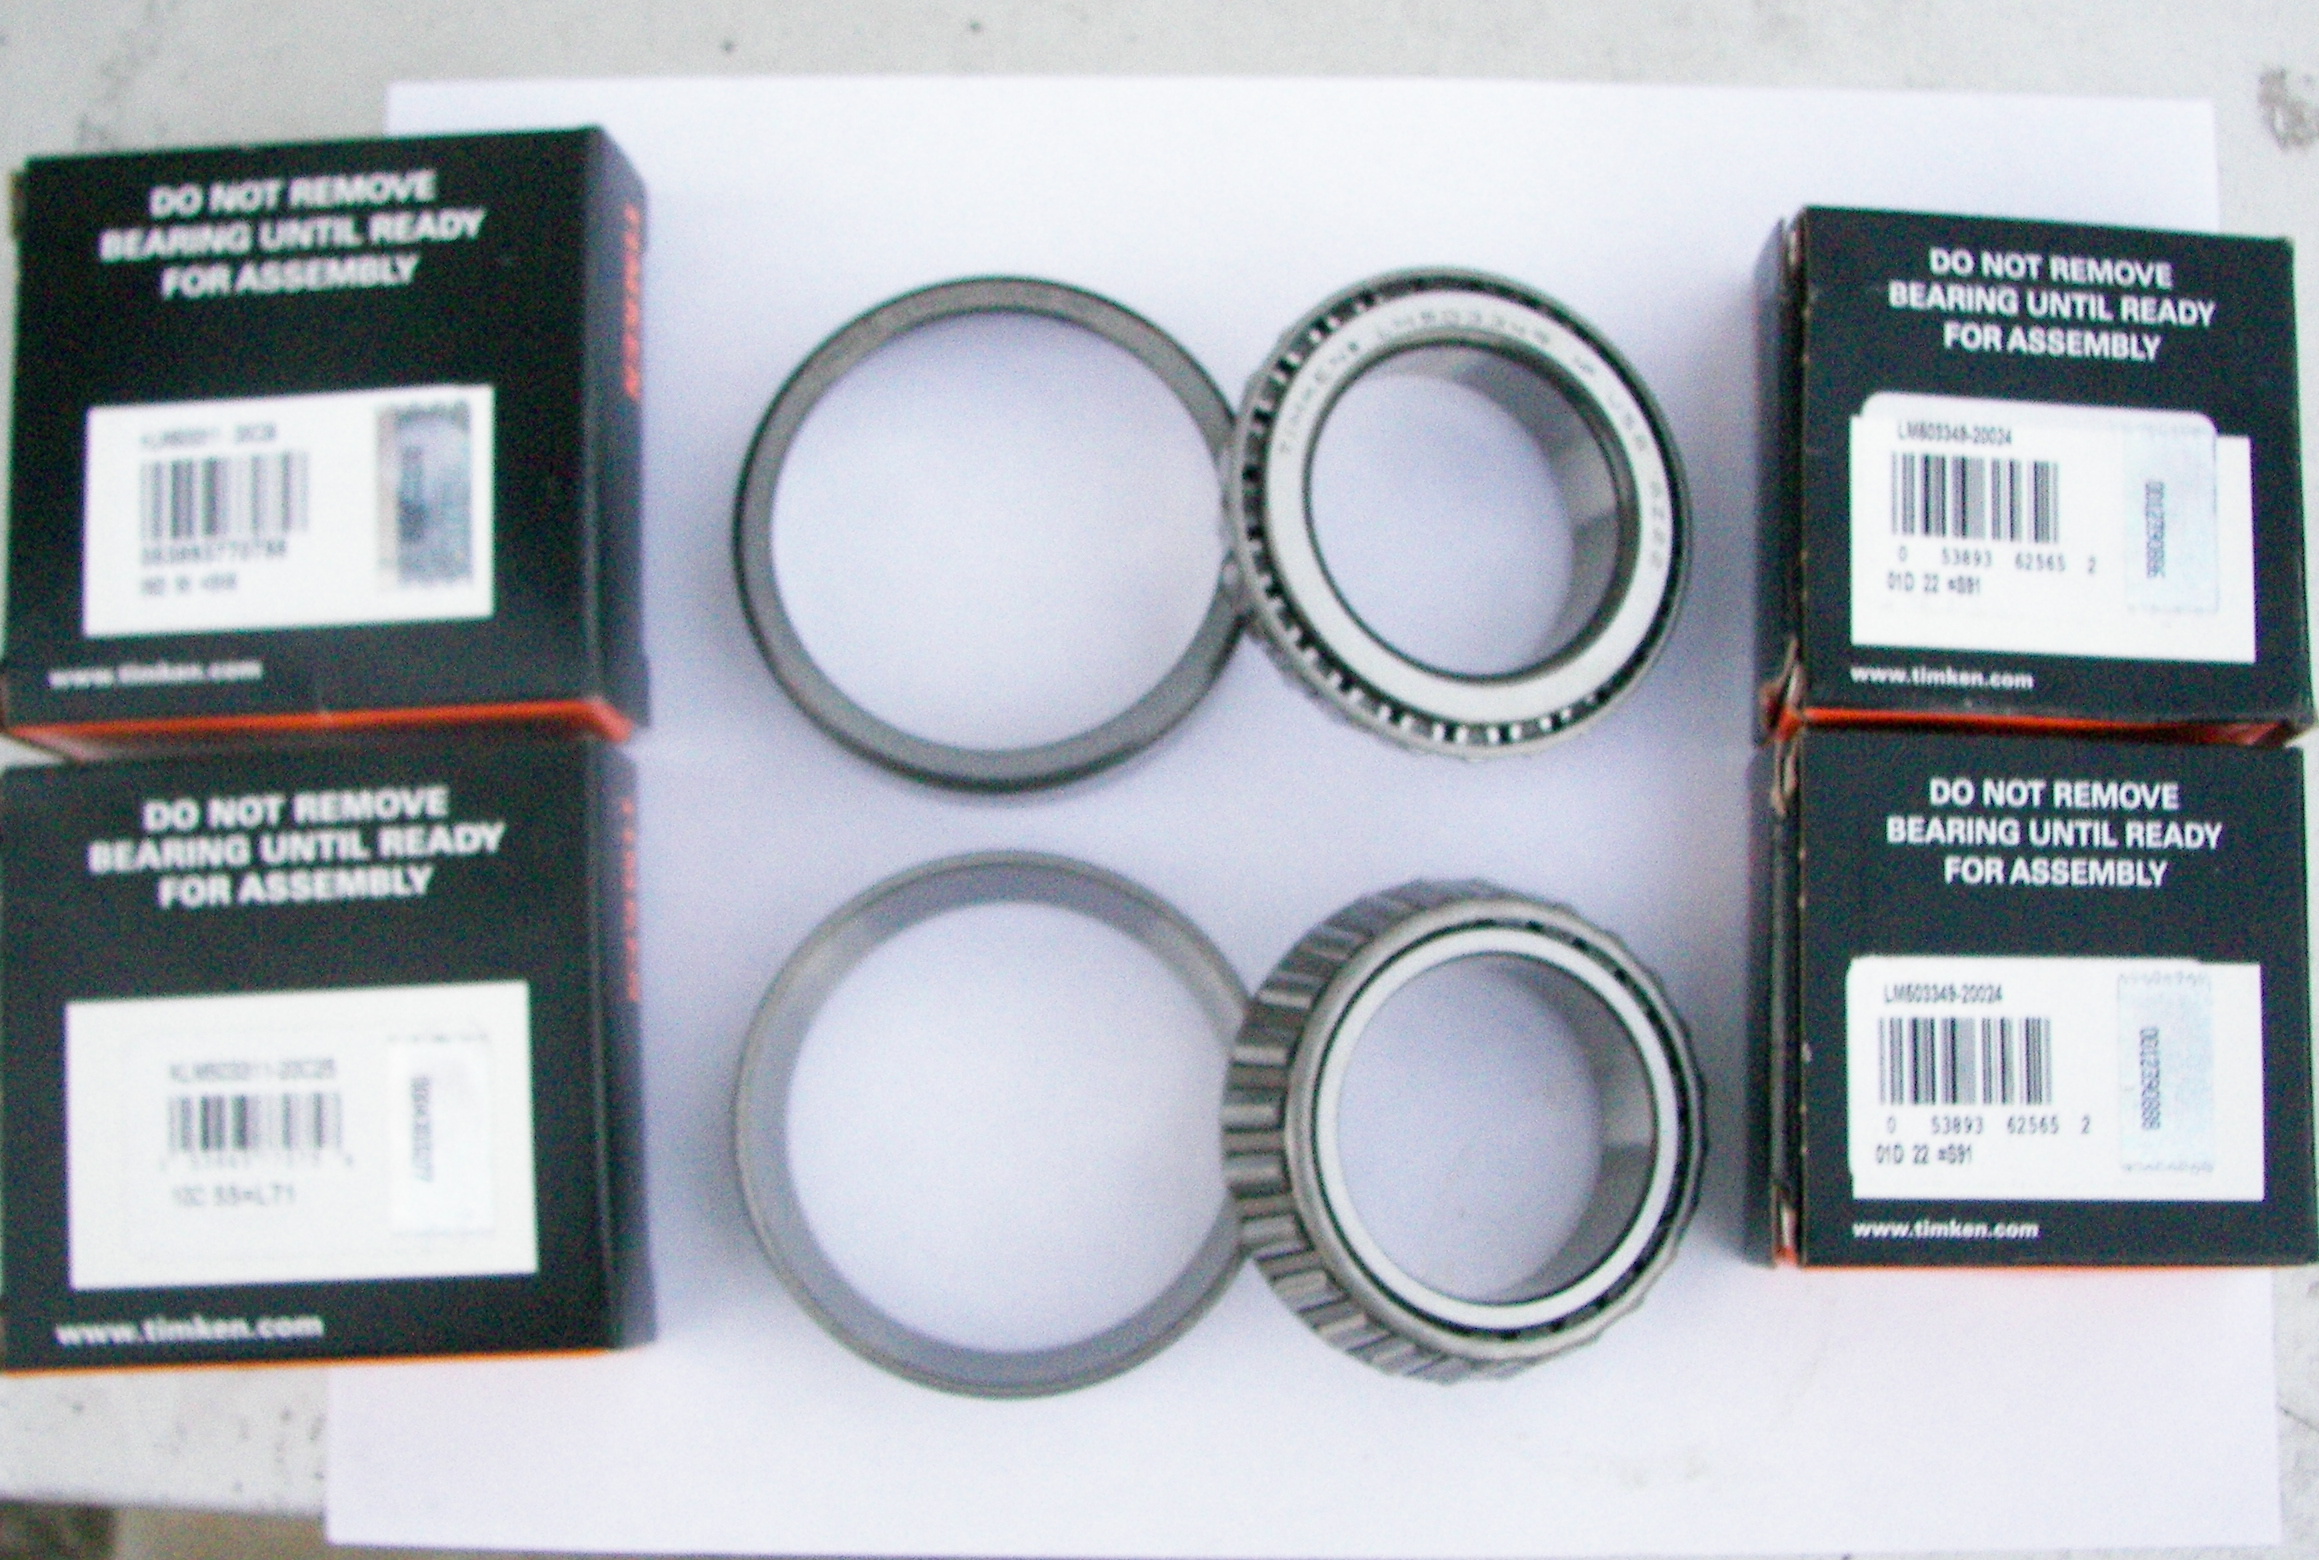 Timken Carrier Bearings and Races with Boxes showing Holographic Seals of Authenticity